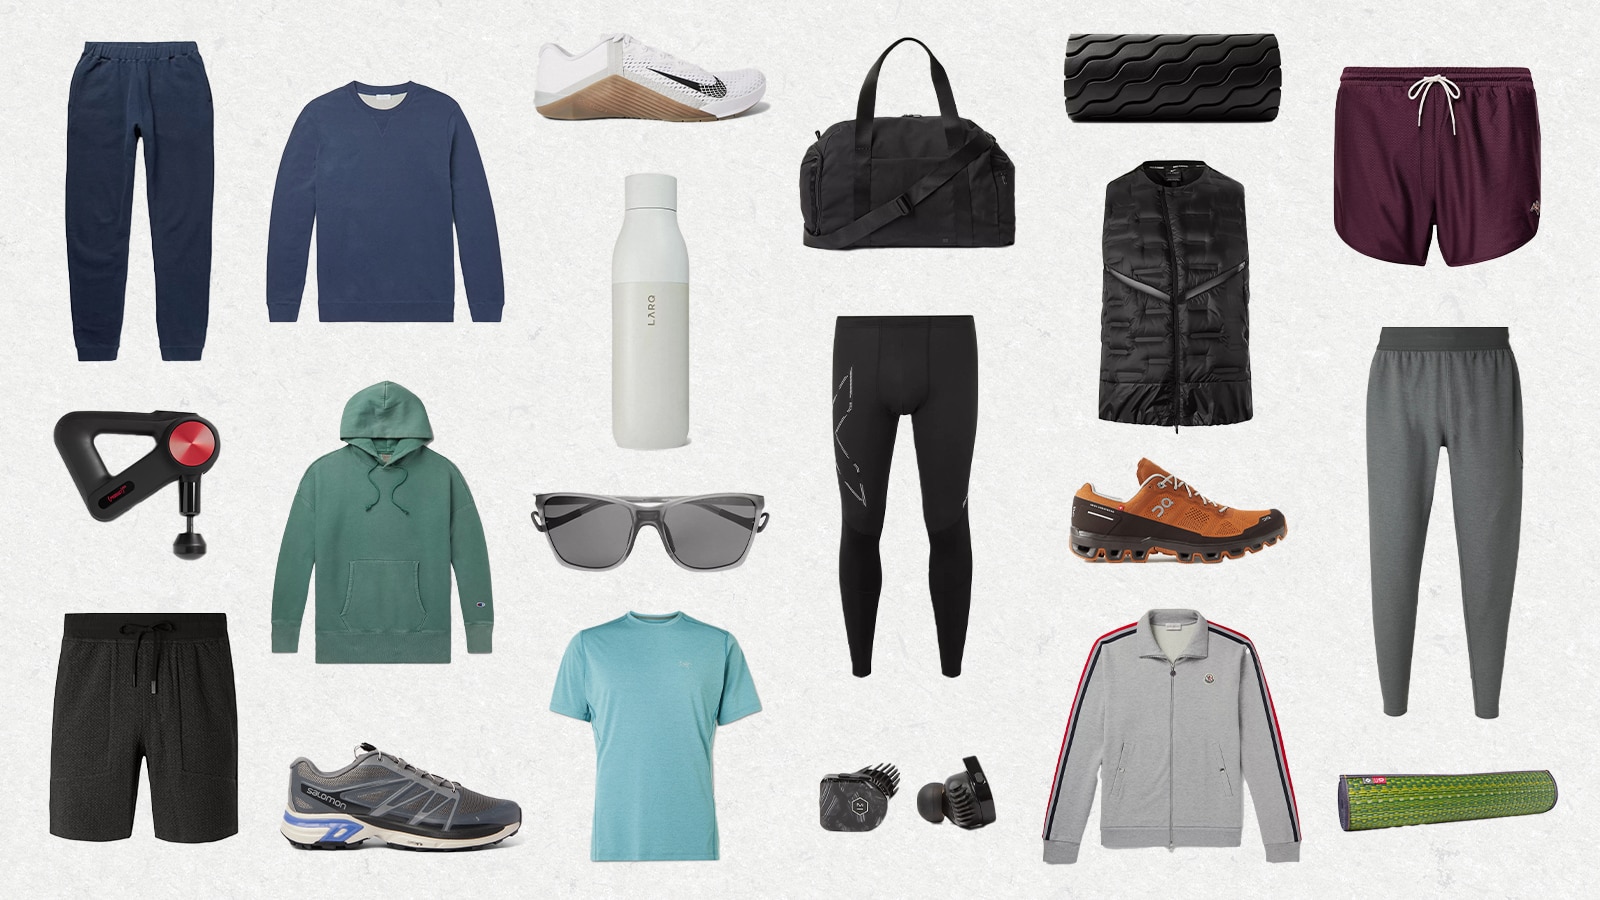 20 Fitness Essentials For 2021 | The Journal | MR PORTER